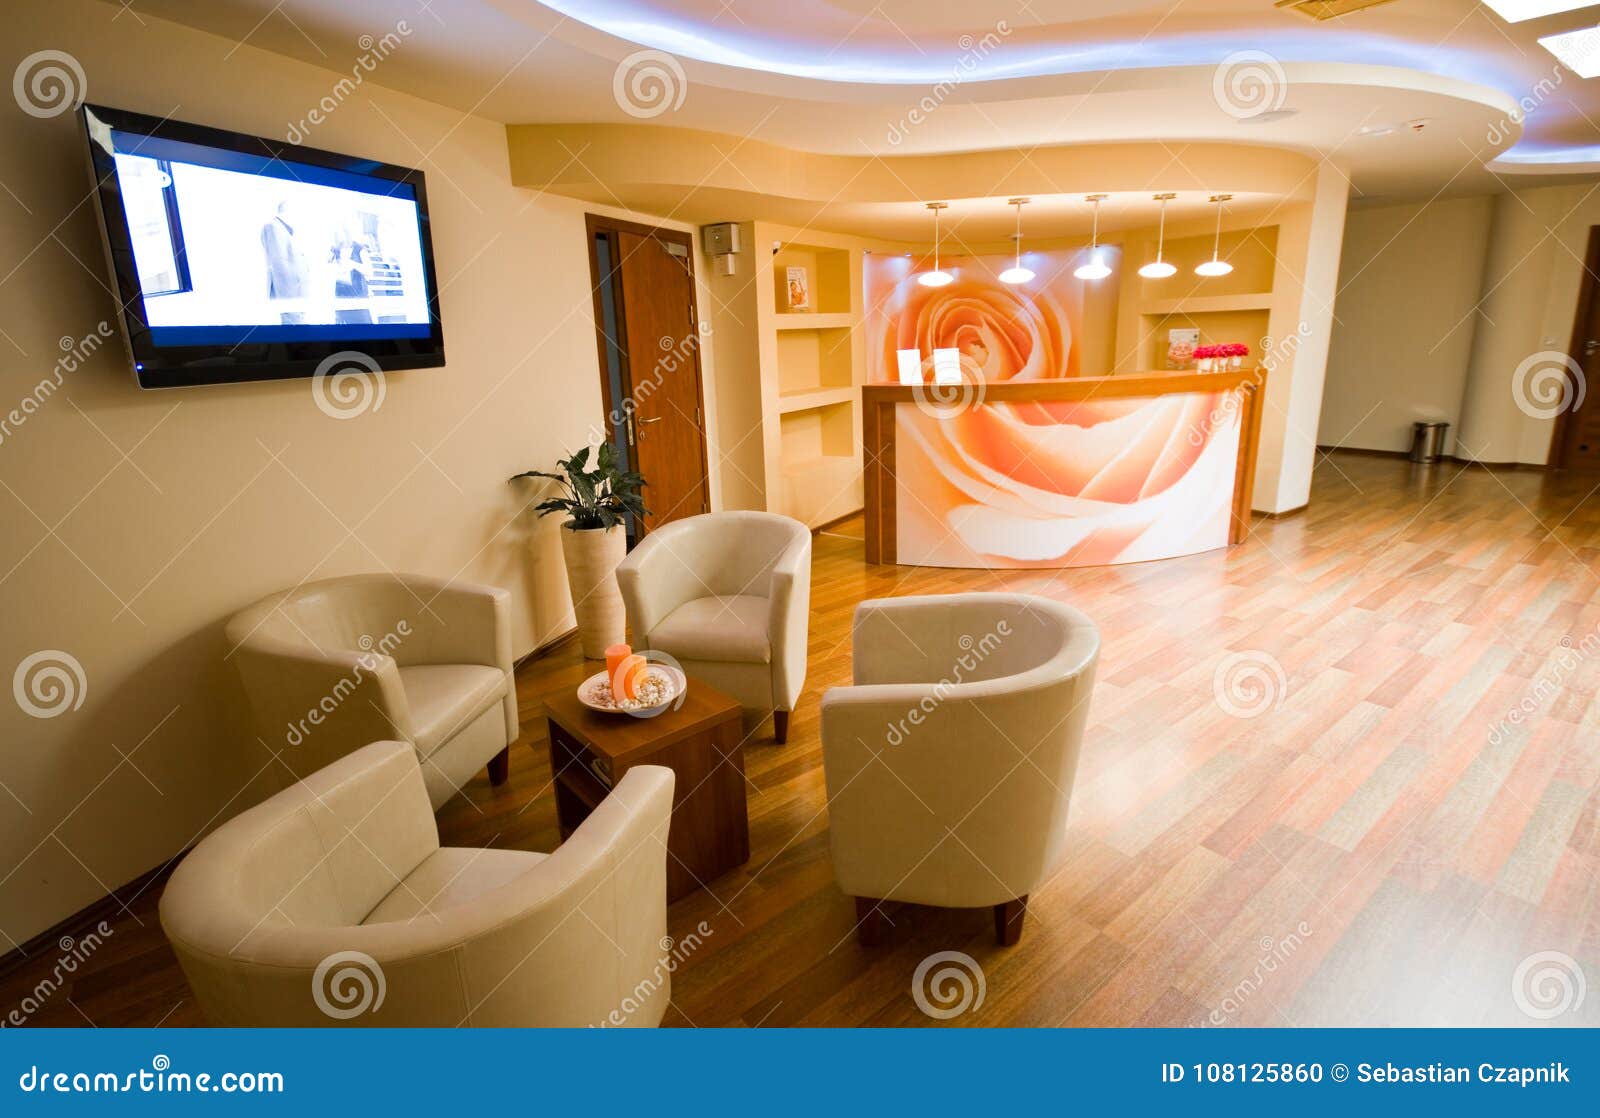 Spa Waiting Room Interior With Leather Chairs Stock Photo Image